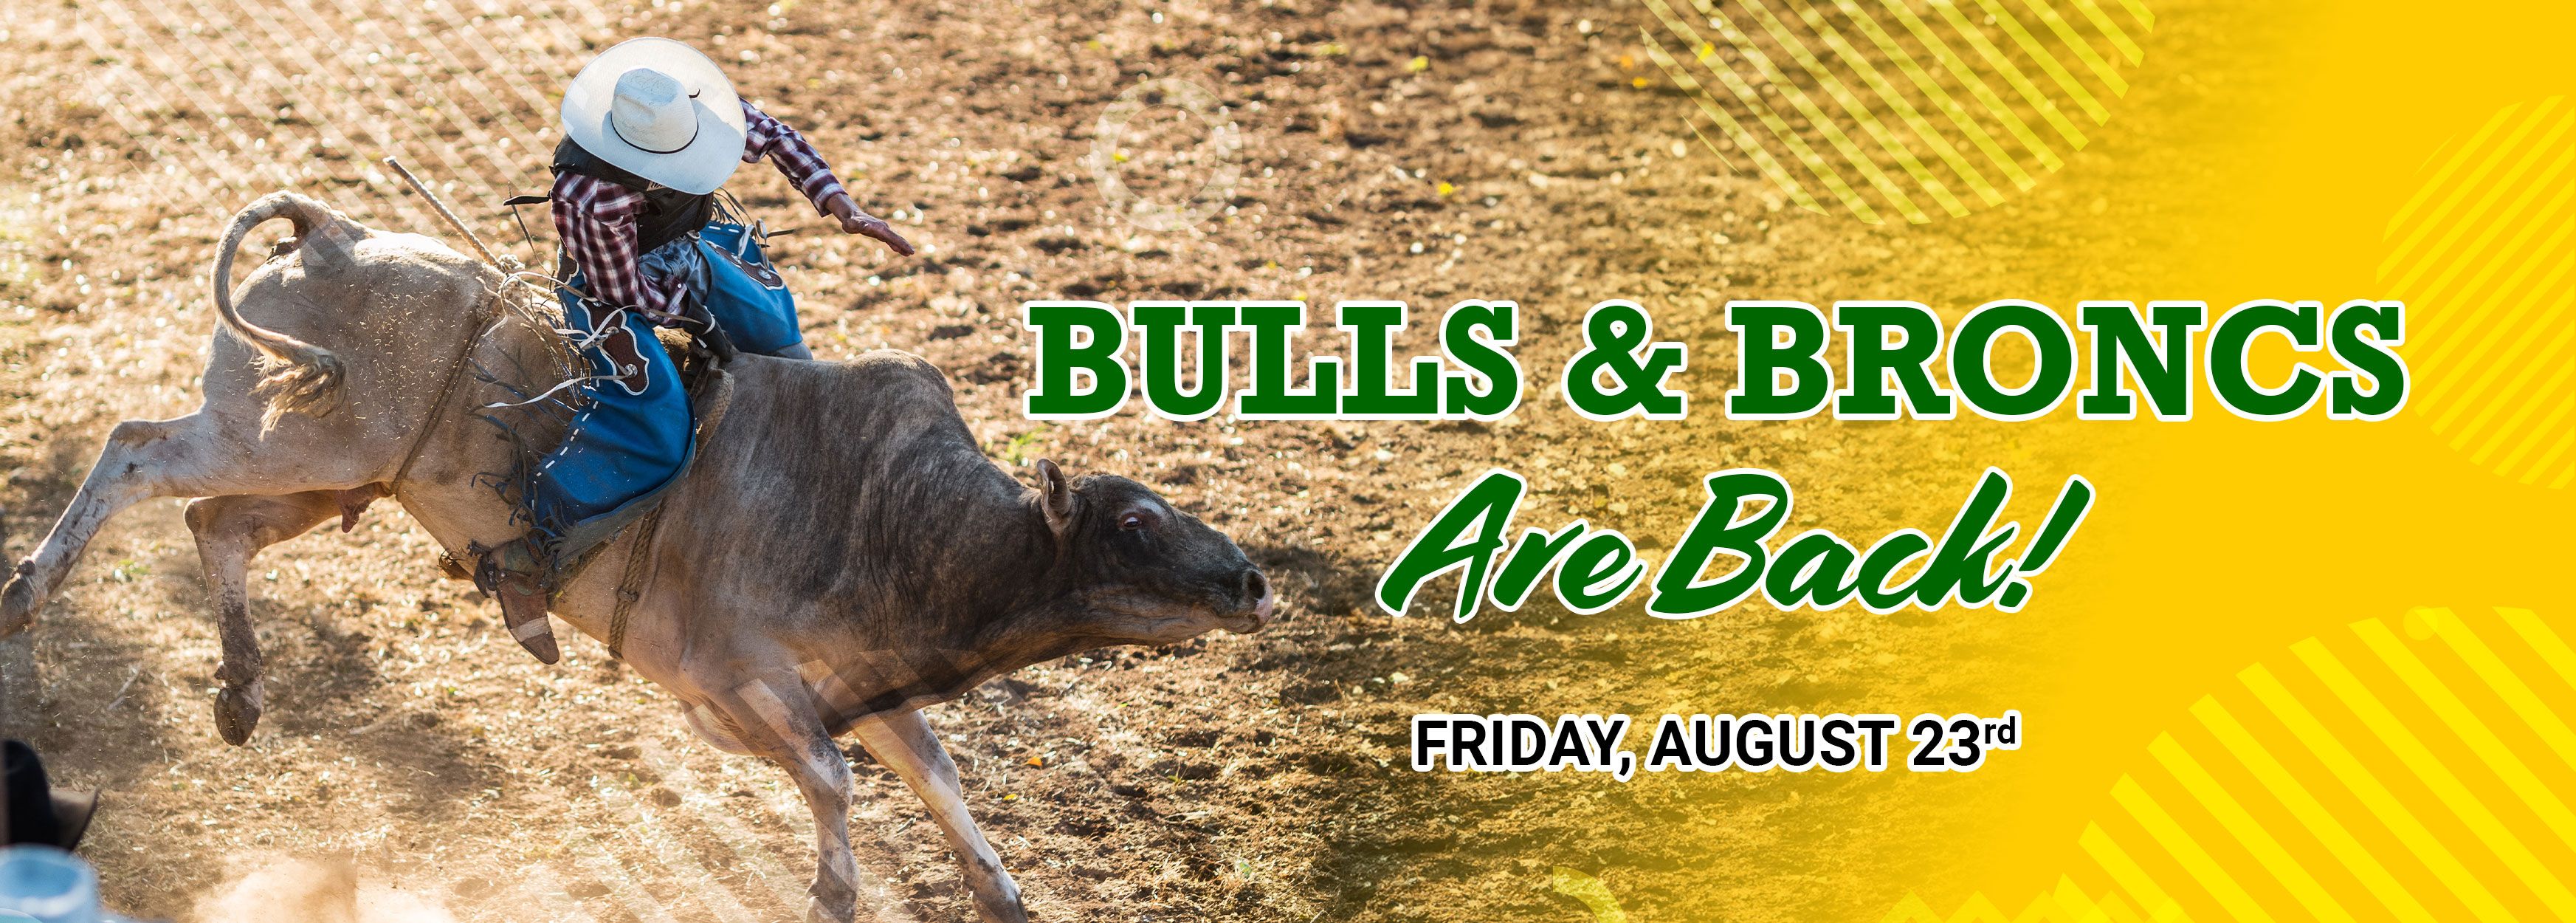 Bulls and Broncs are Back at the Butte County Fair